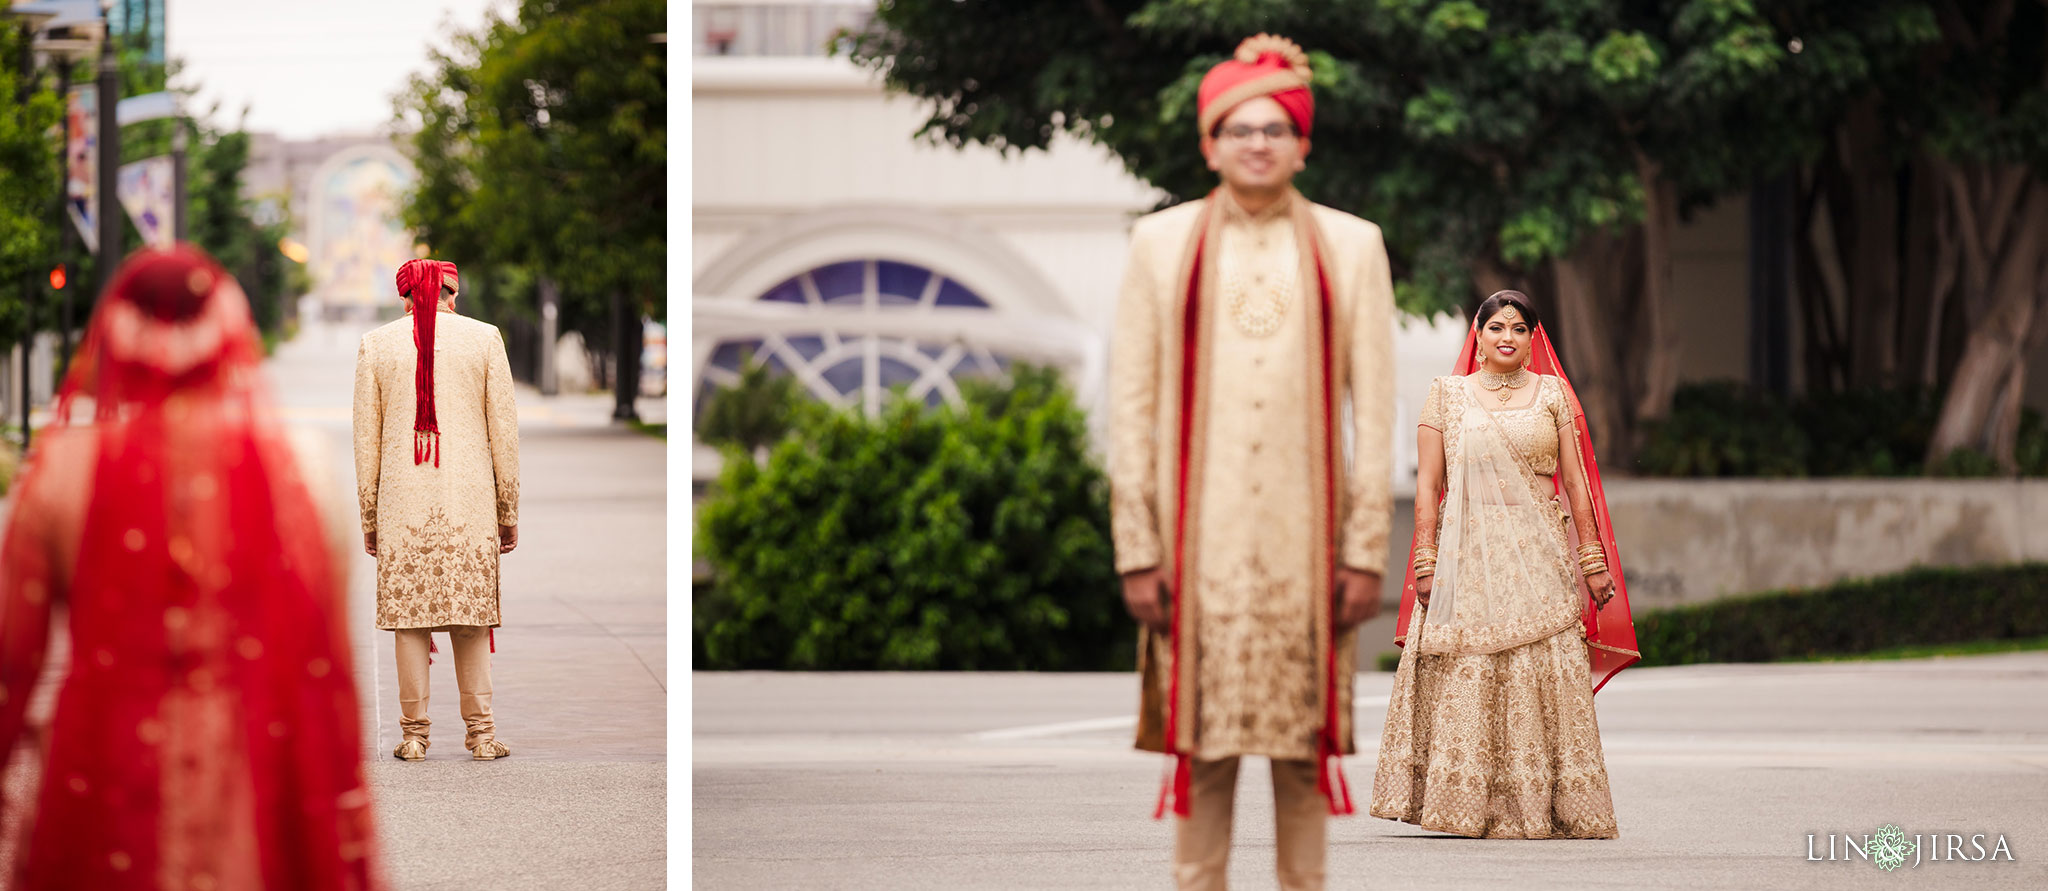 017 Long Beach Performing Arts Center First Look Indian Wedding Photography